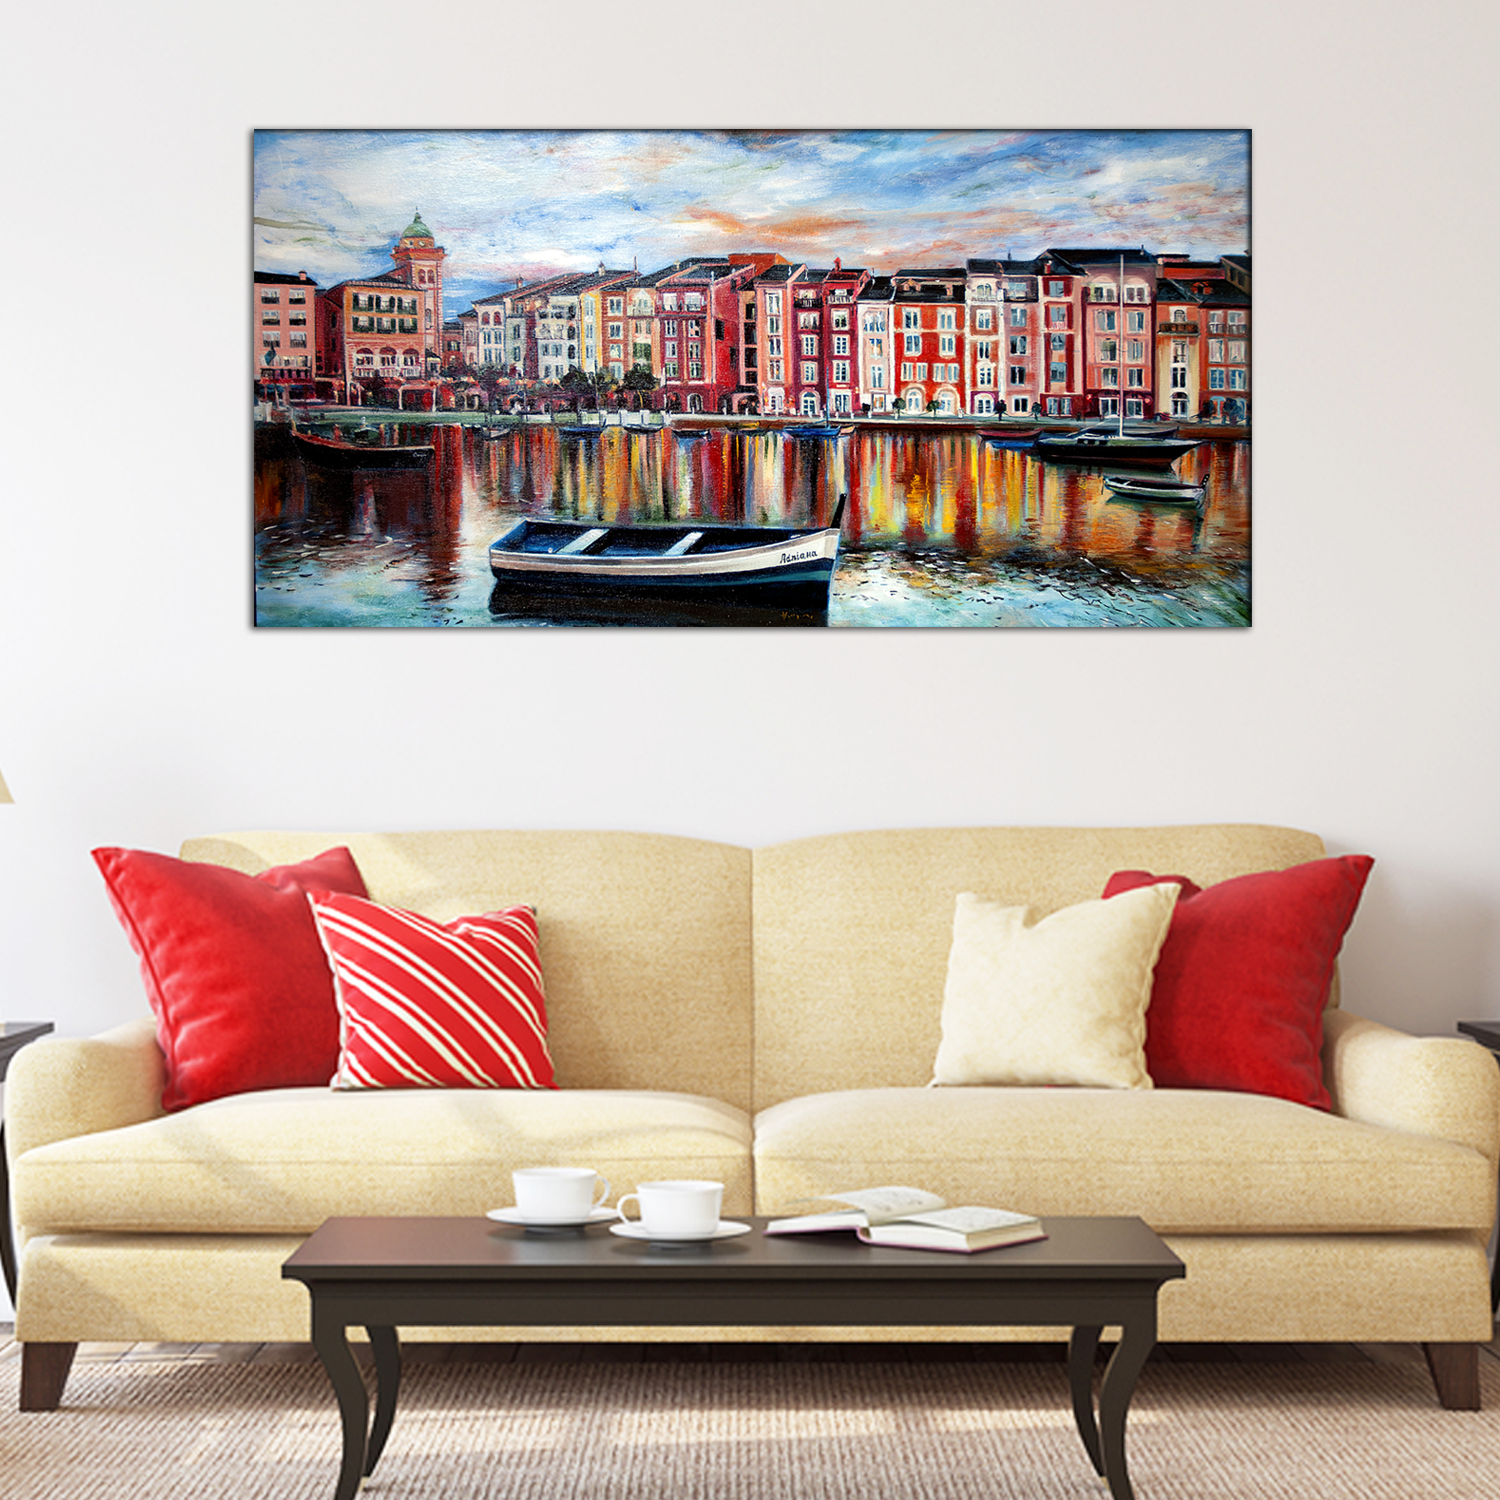 The Sunset Canvas Print Wall Painting